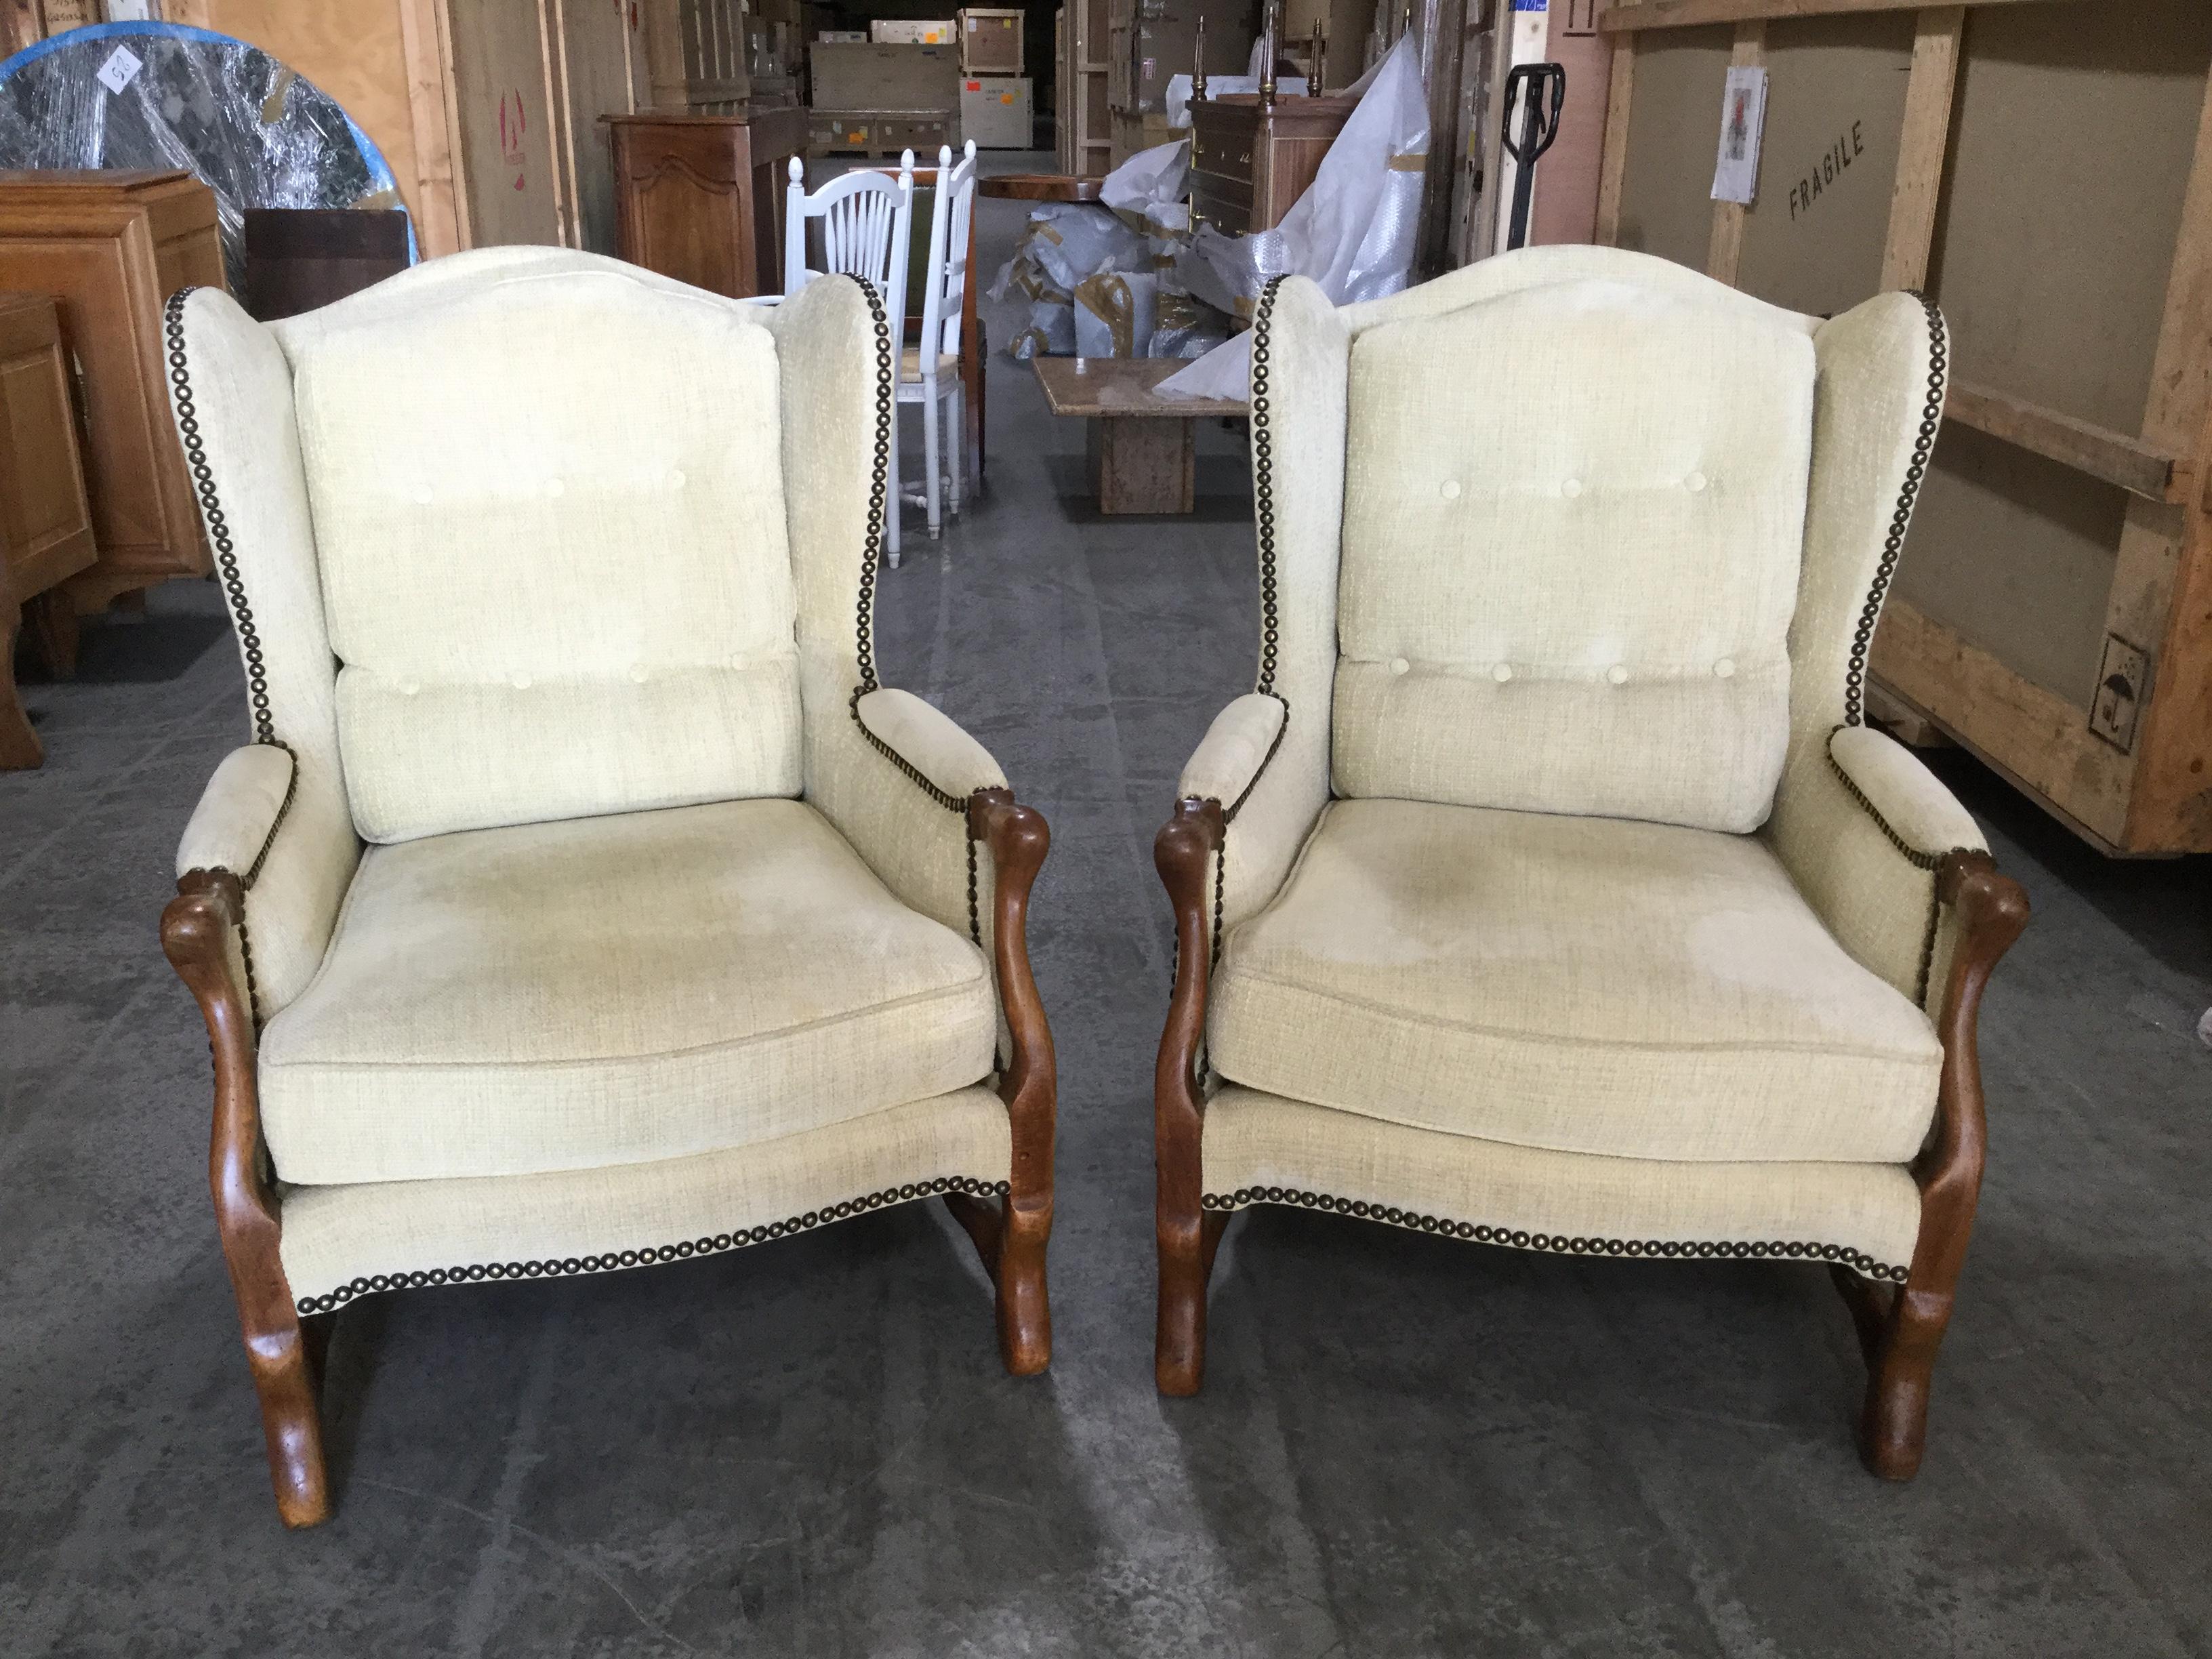 Handsome pair of French bergères chairs. Offering the utmost comfort, these chairs are wide, deep, and inviting. While remaining stylish. Newly upholstered in an off-white velvet chenille fabric, these chairs are built of French oak with Louis